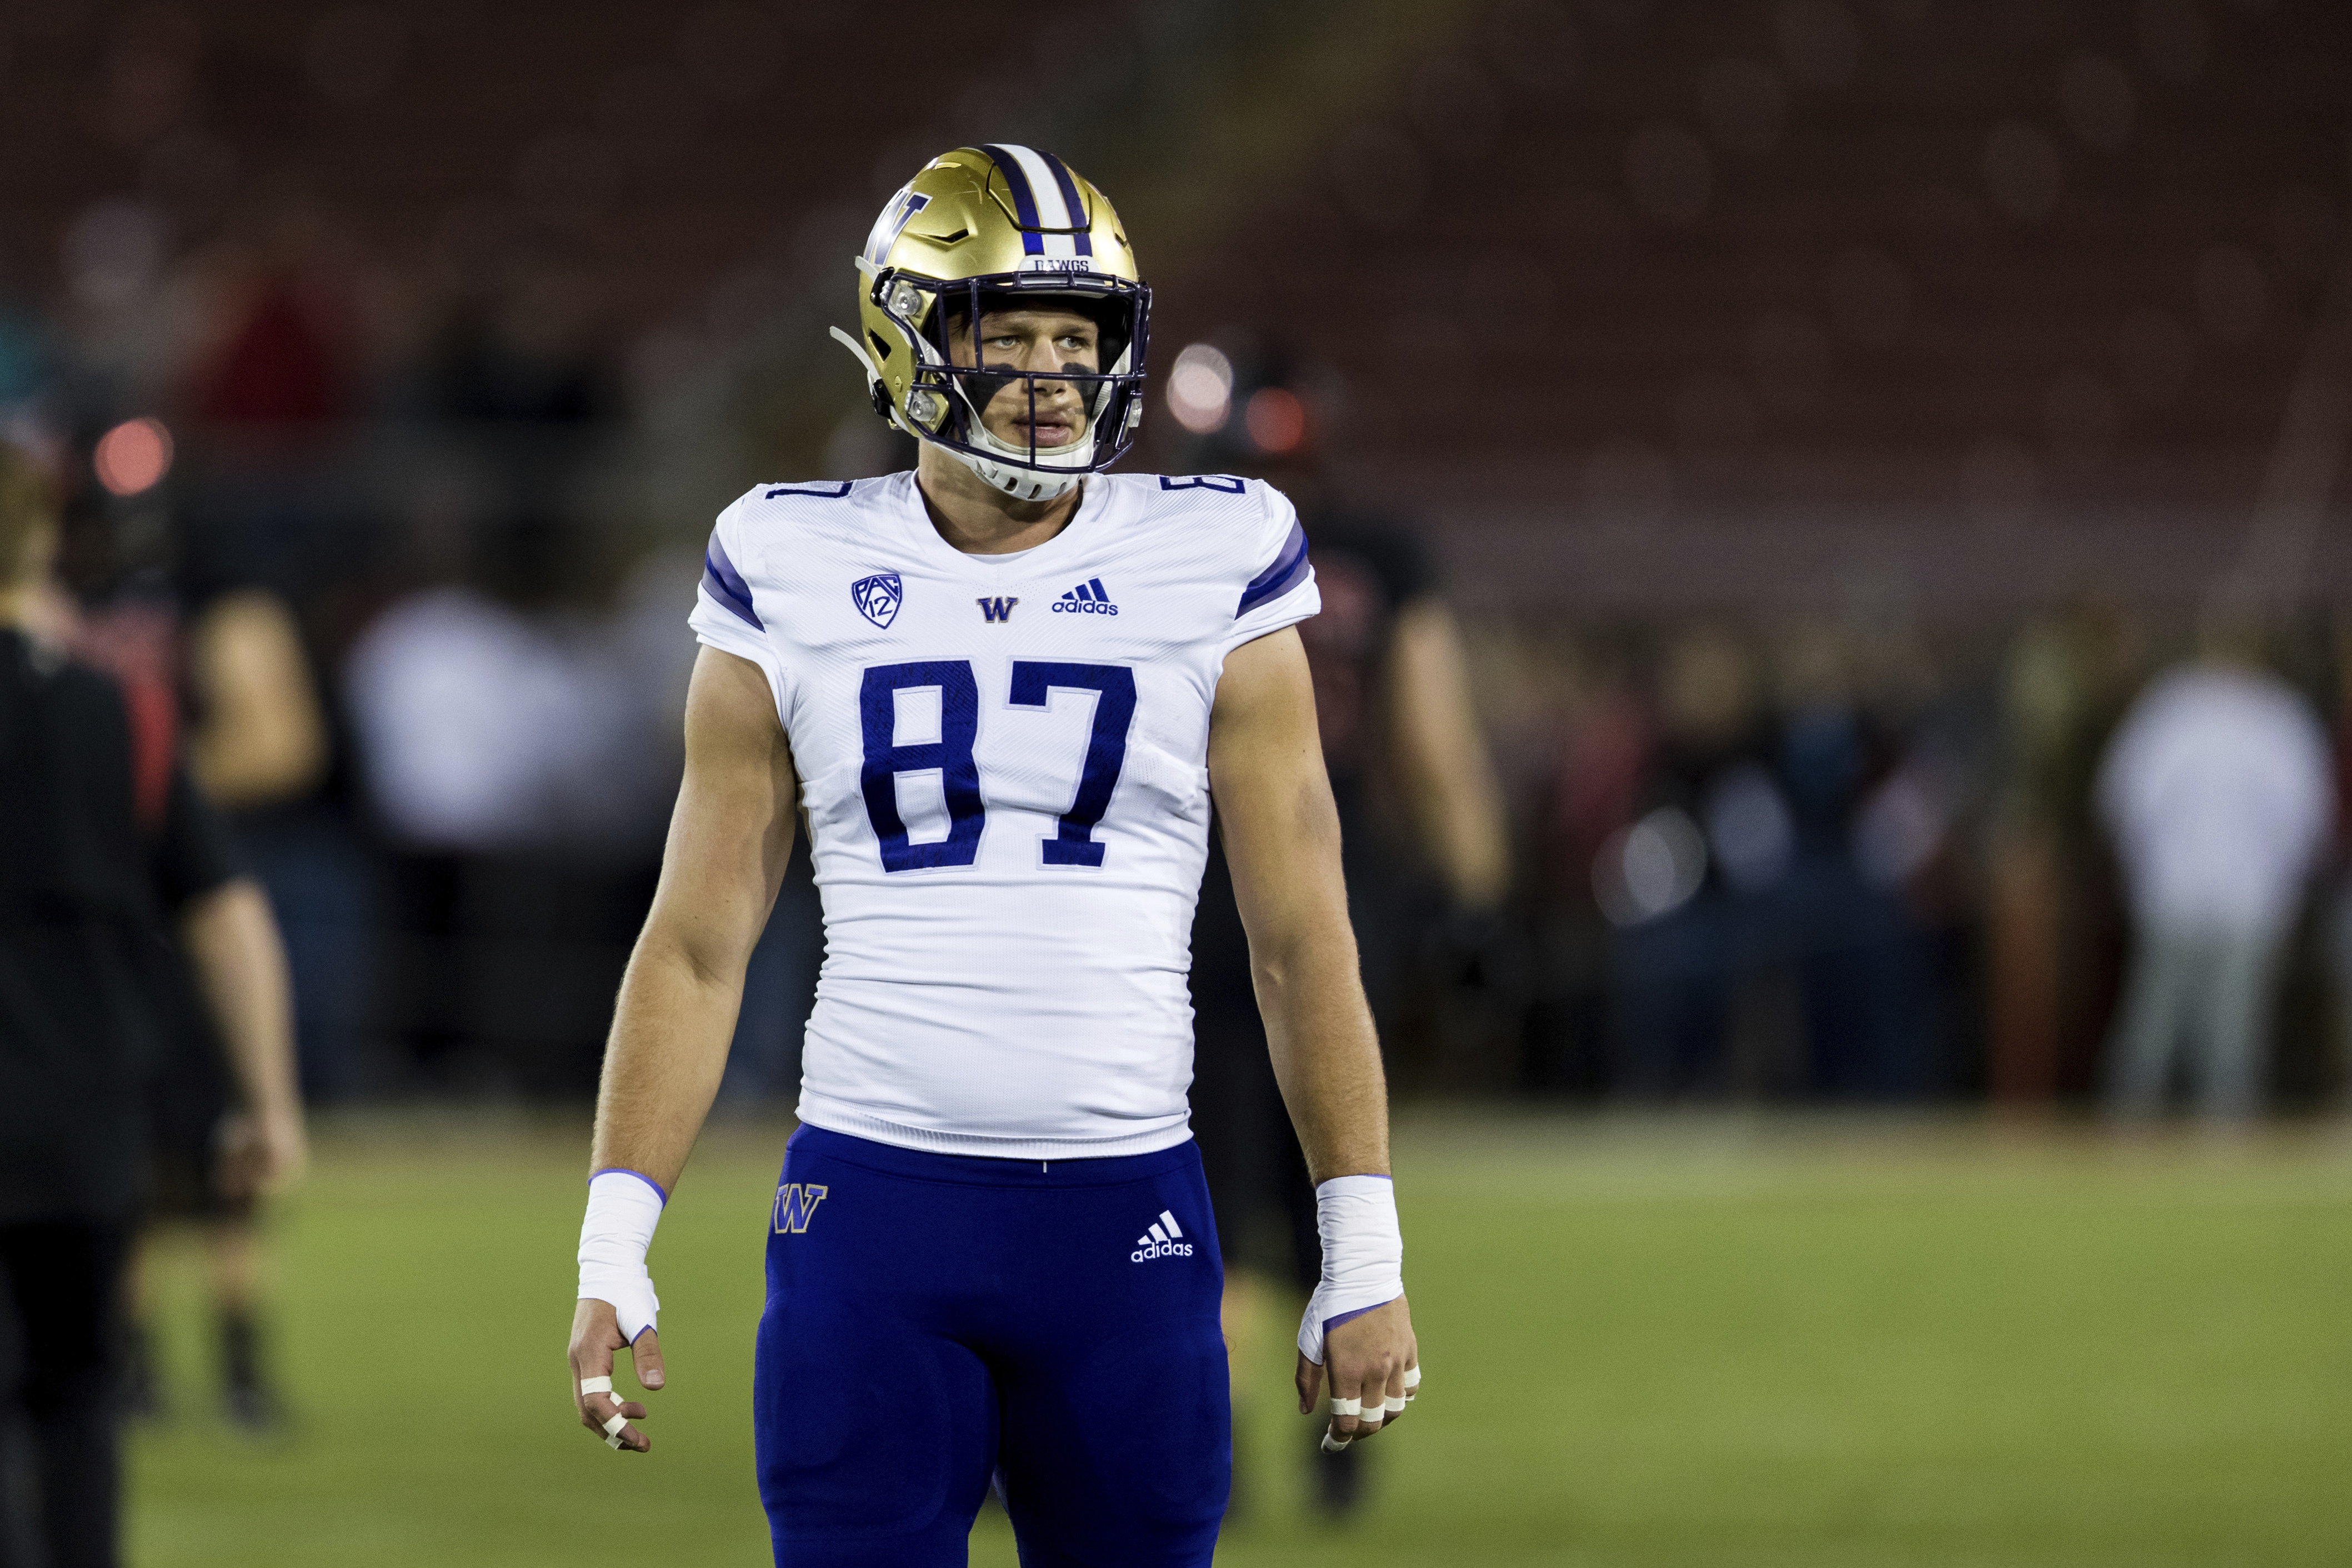 UW tight end Cade Otton taken by Tampa Bay Buccaneers in fourth round of  2022 NFL draft